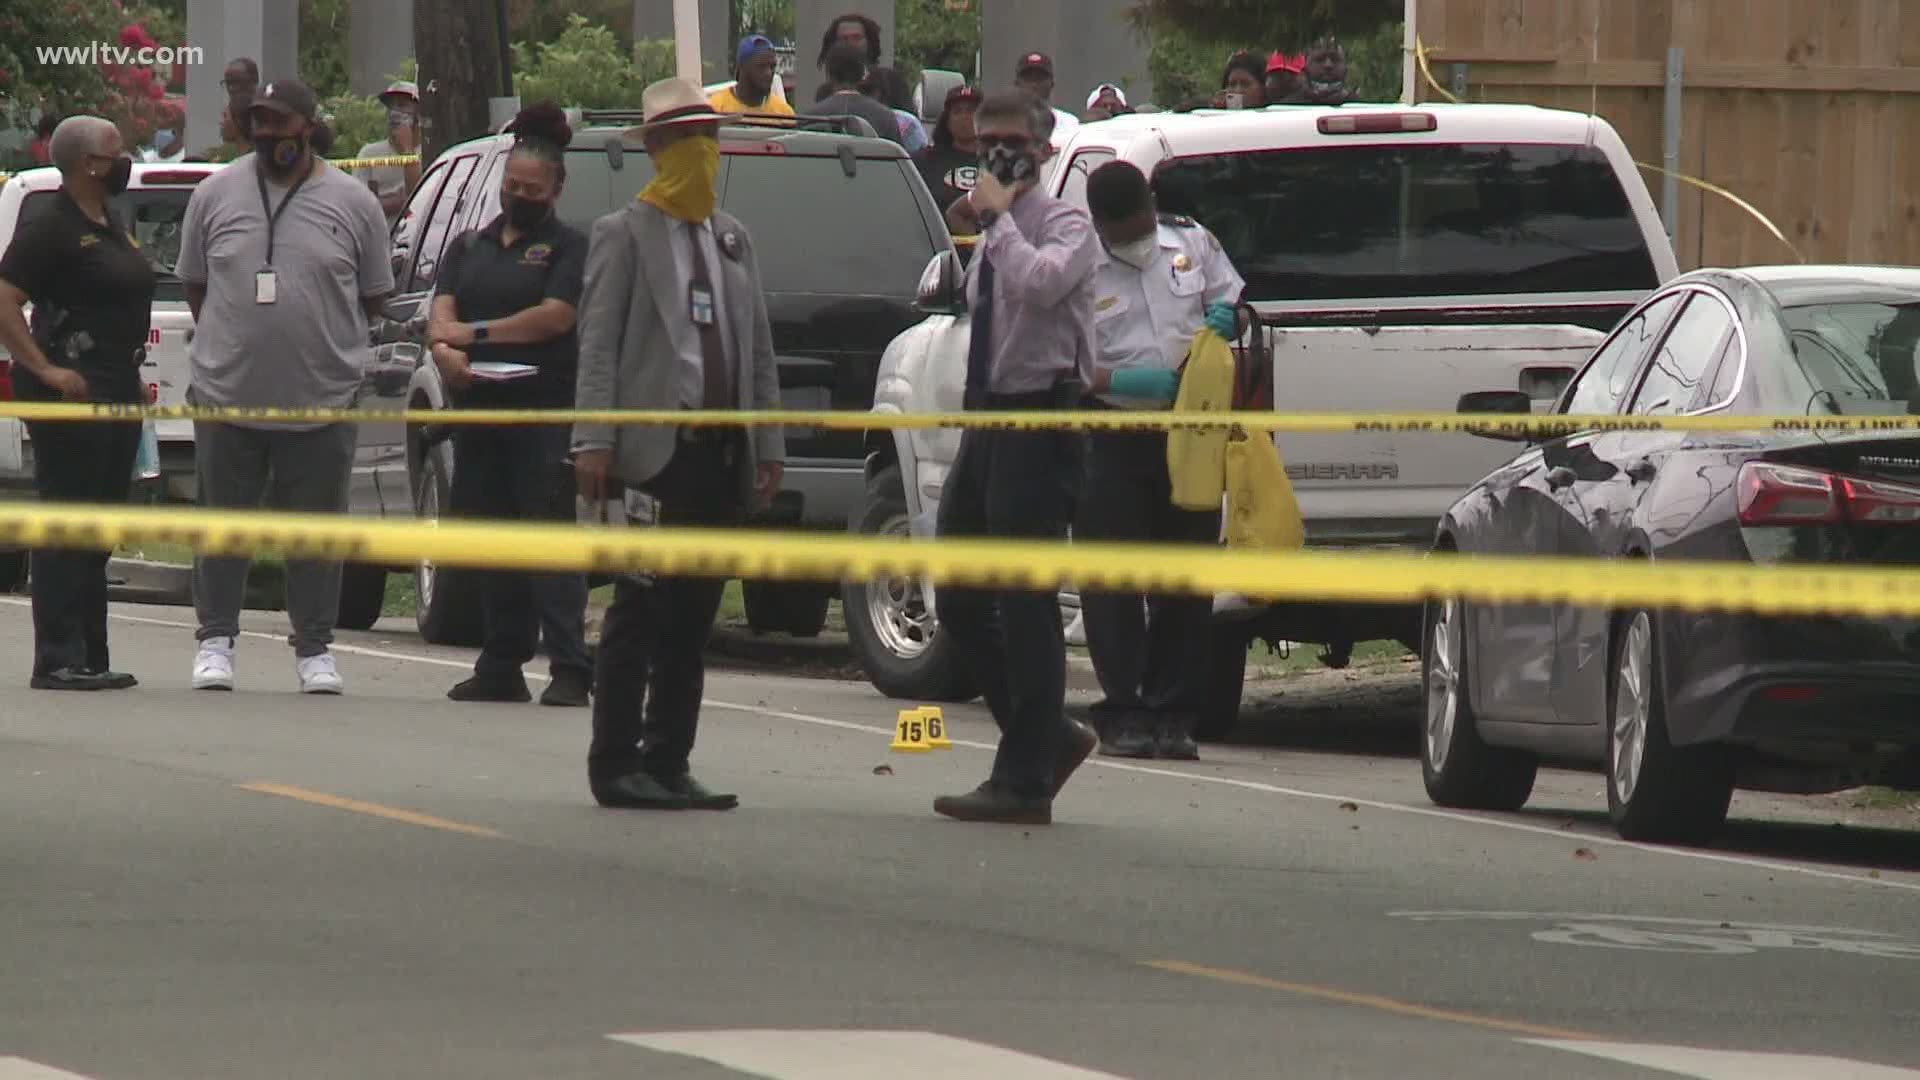 Bullets flew into a car on Jackson Avenue, killing one person and injuring another Monday in New Orleans.